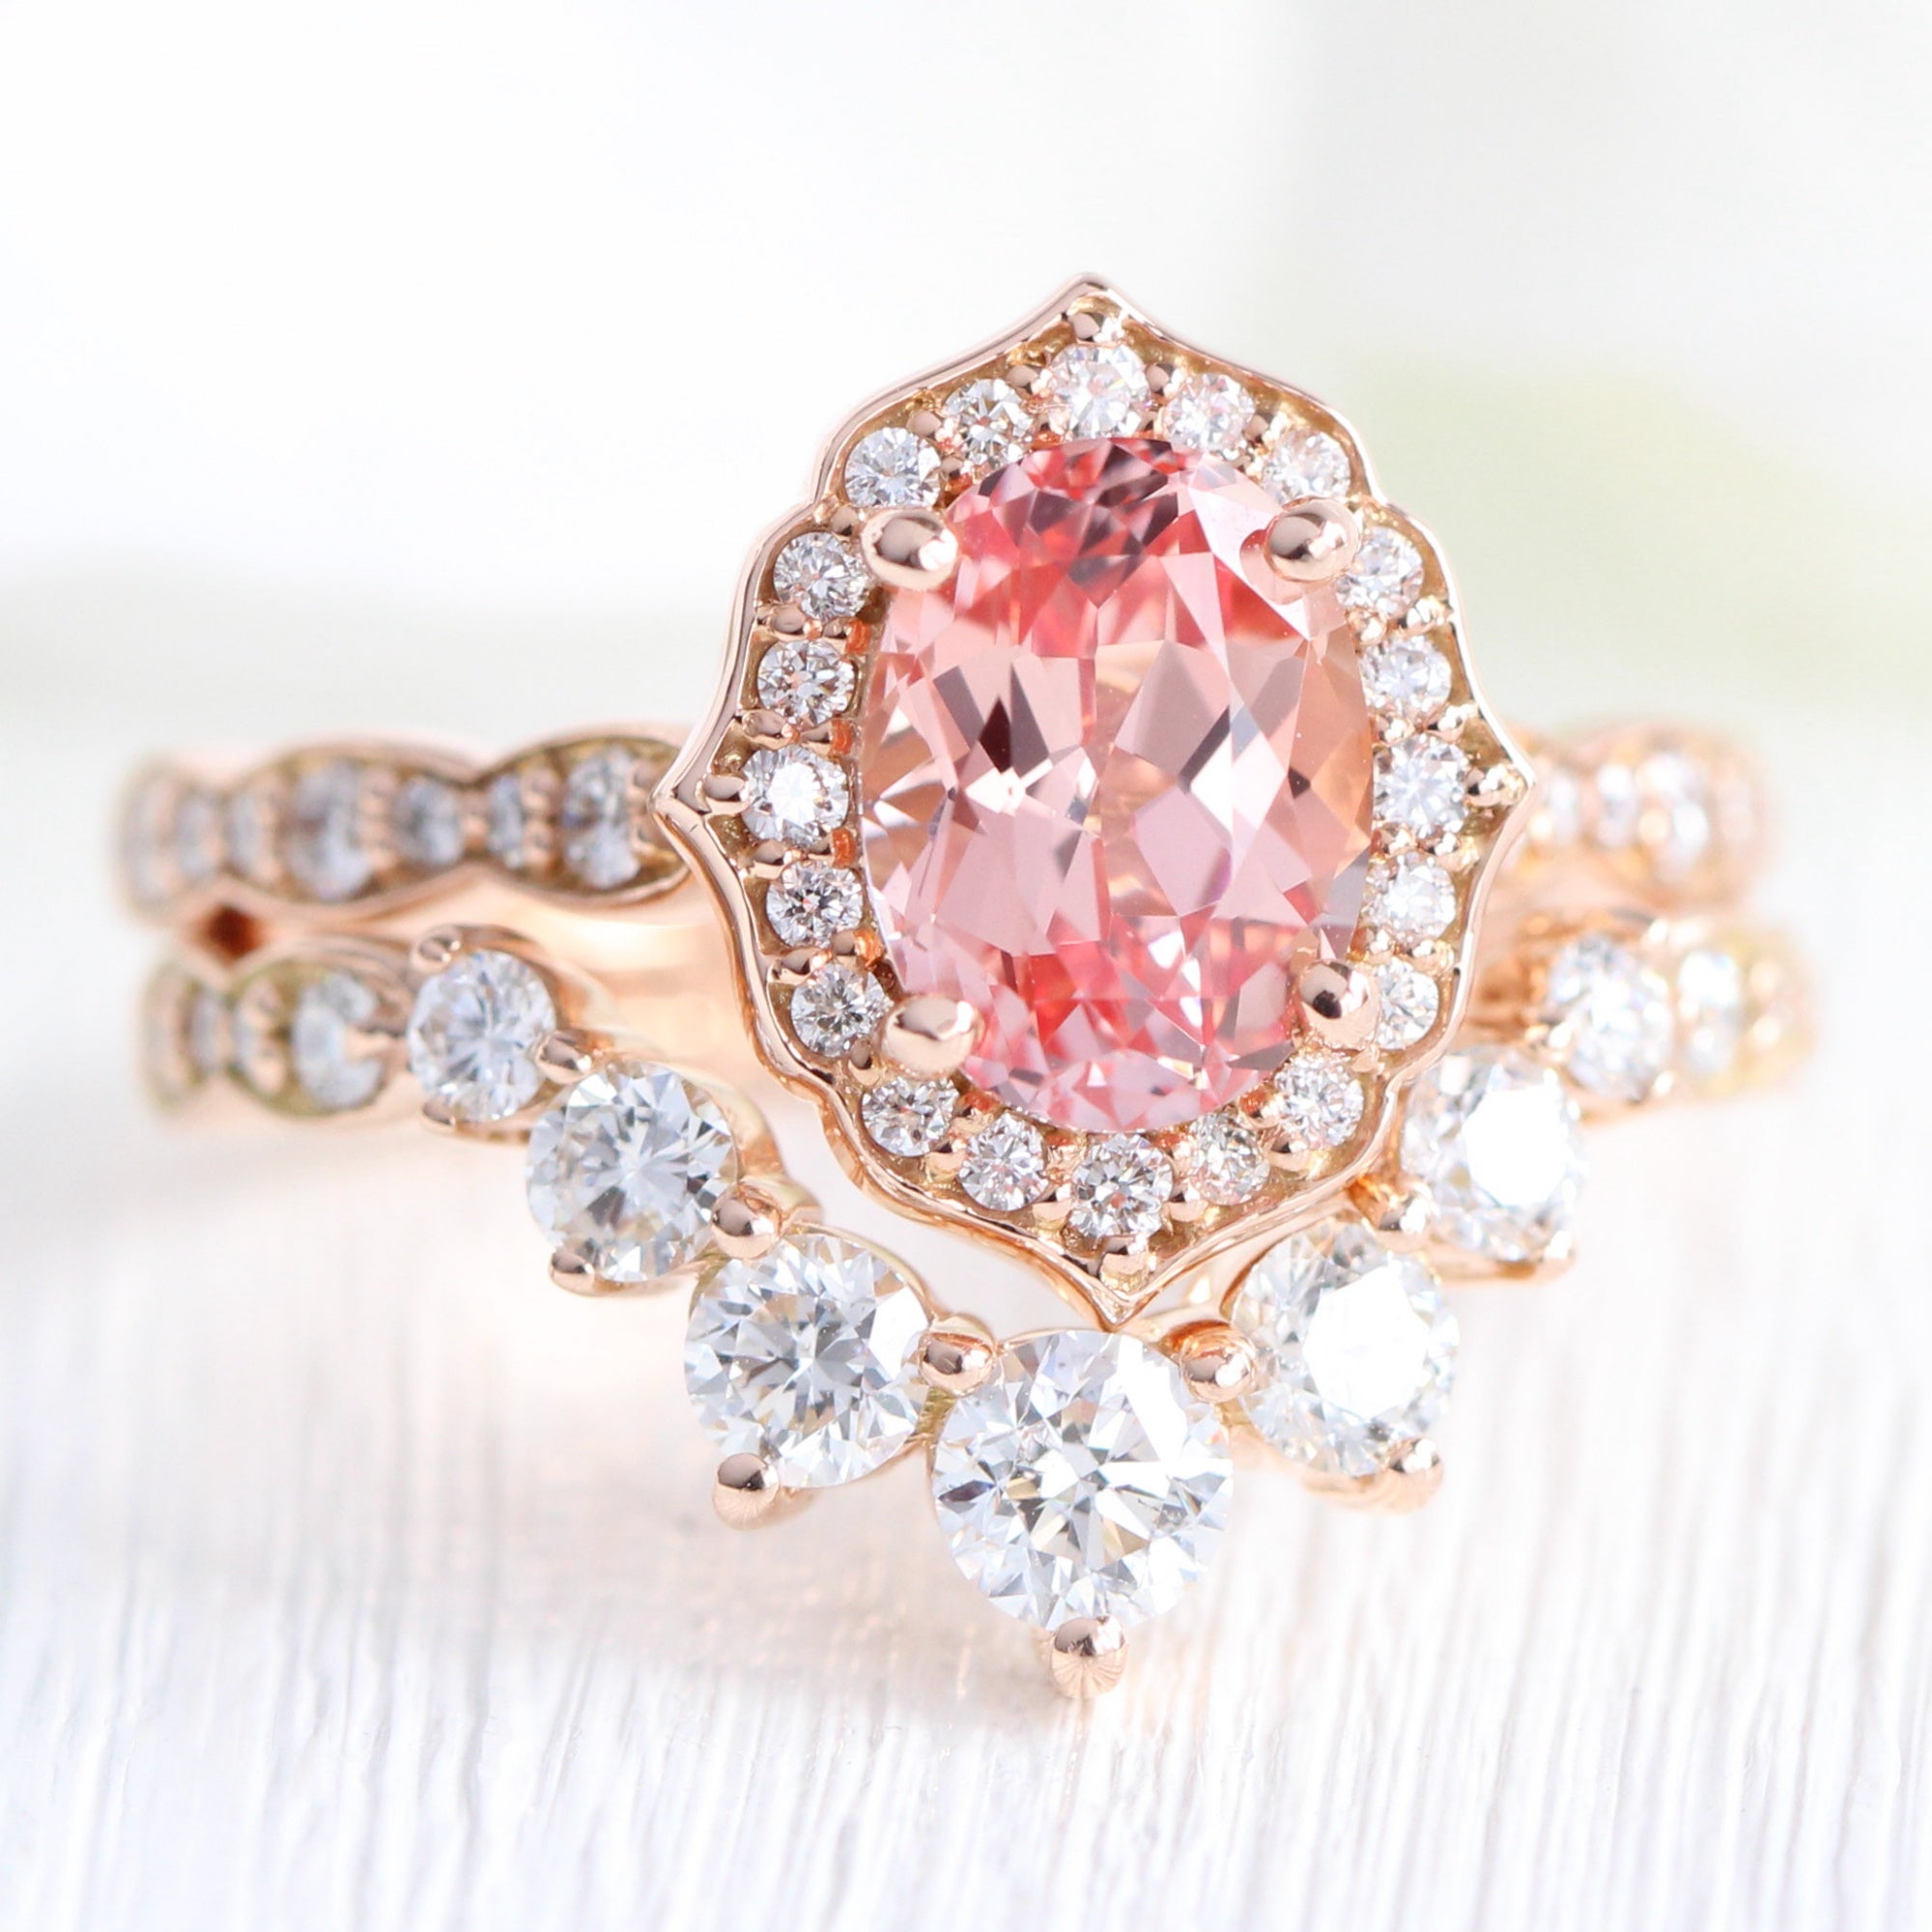 Vintage halo oval peach sapphire ring stack rose gold curved diamond wedding band la more design jewelry